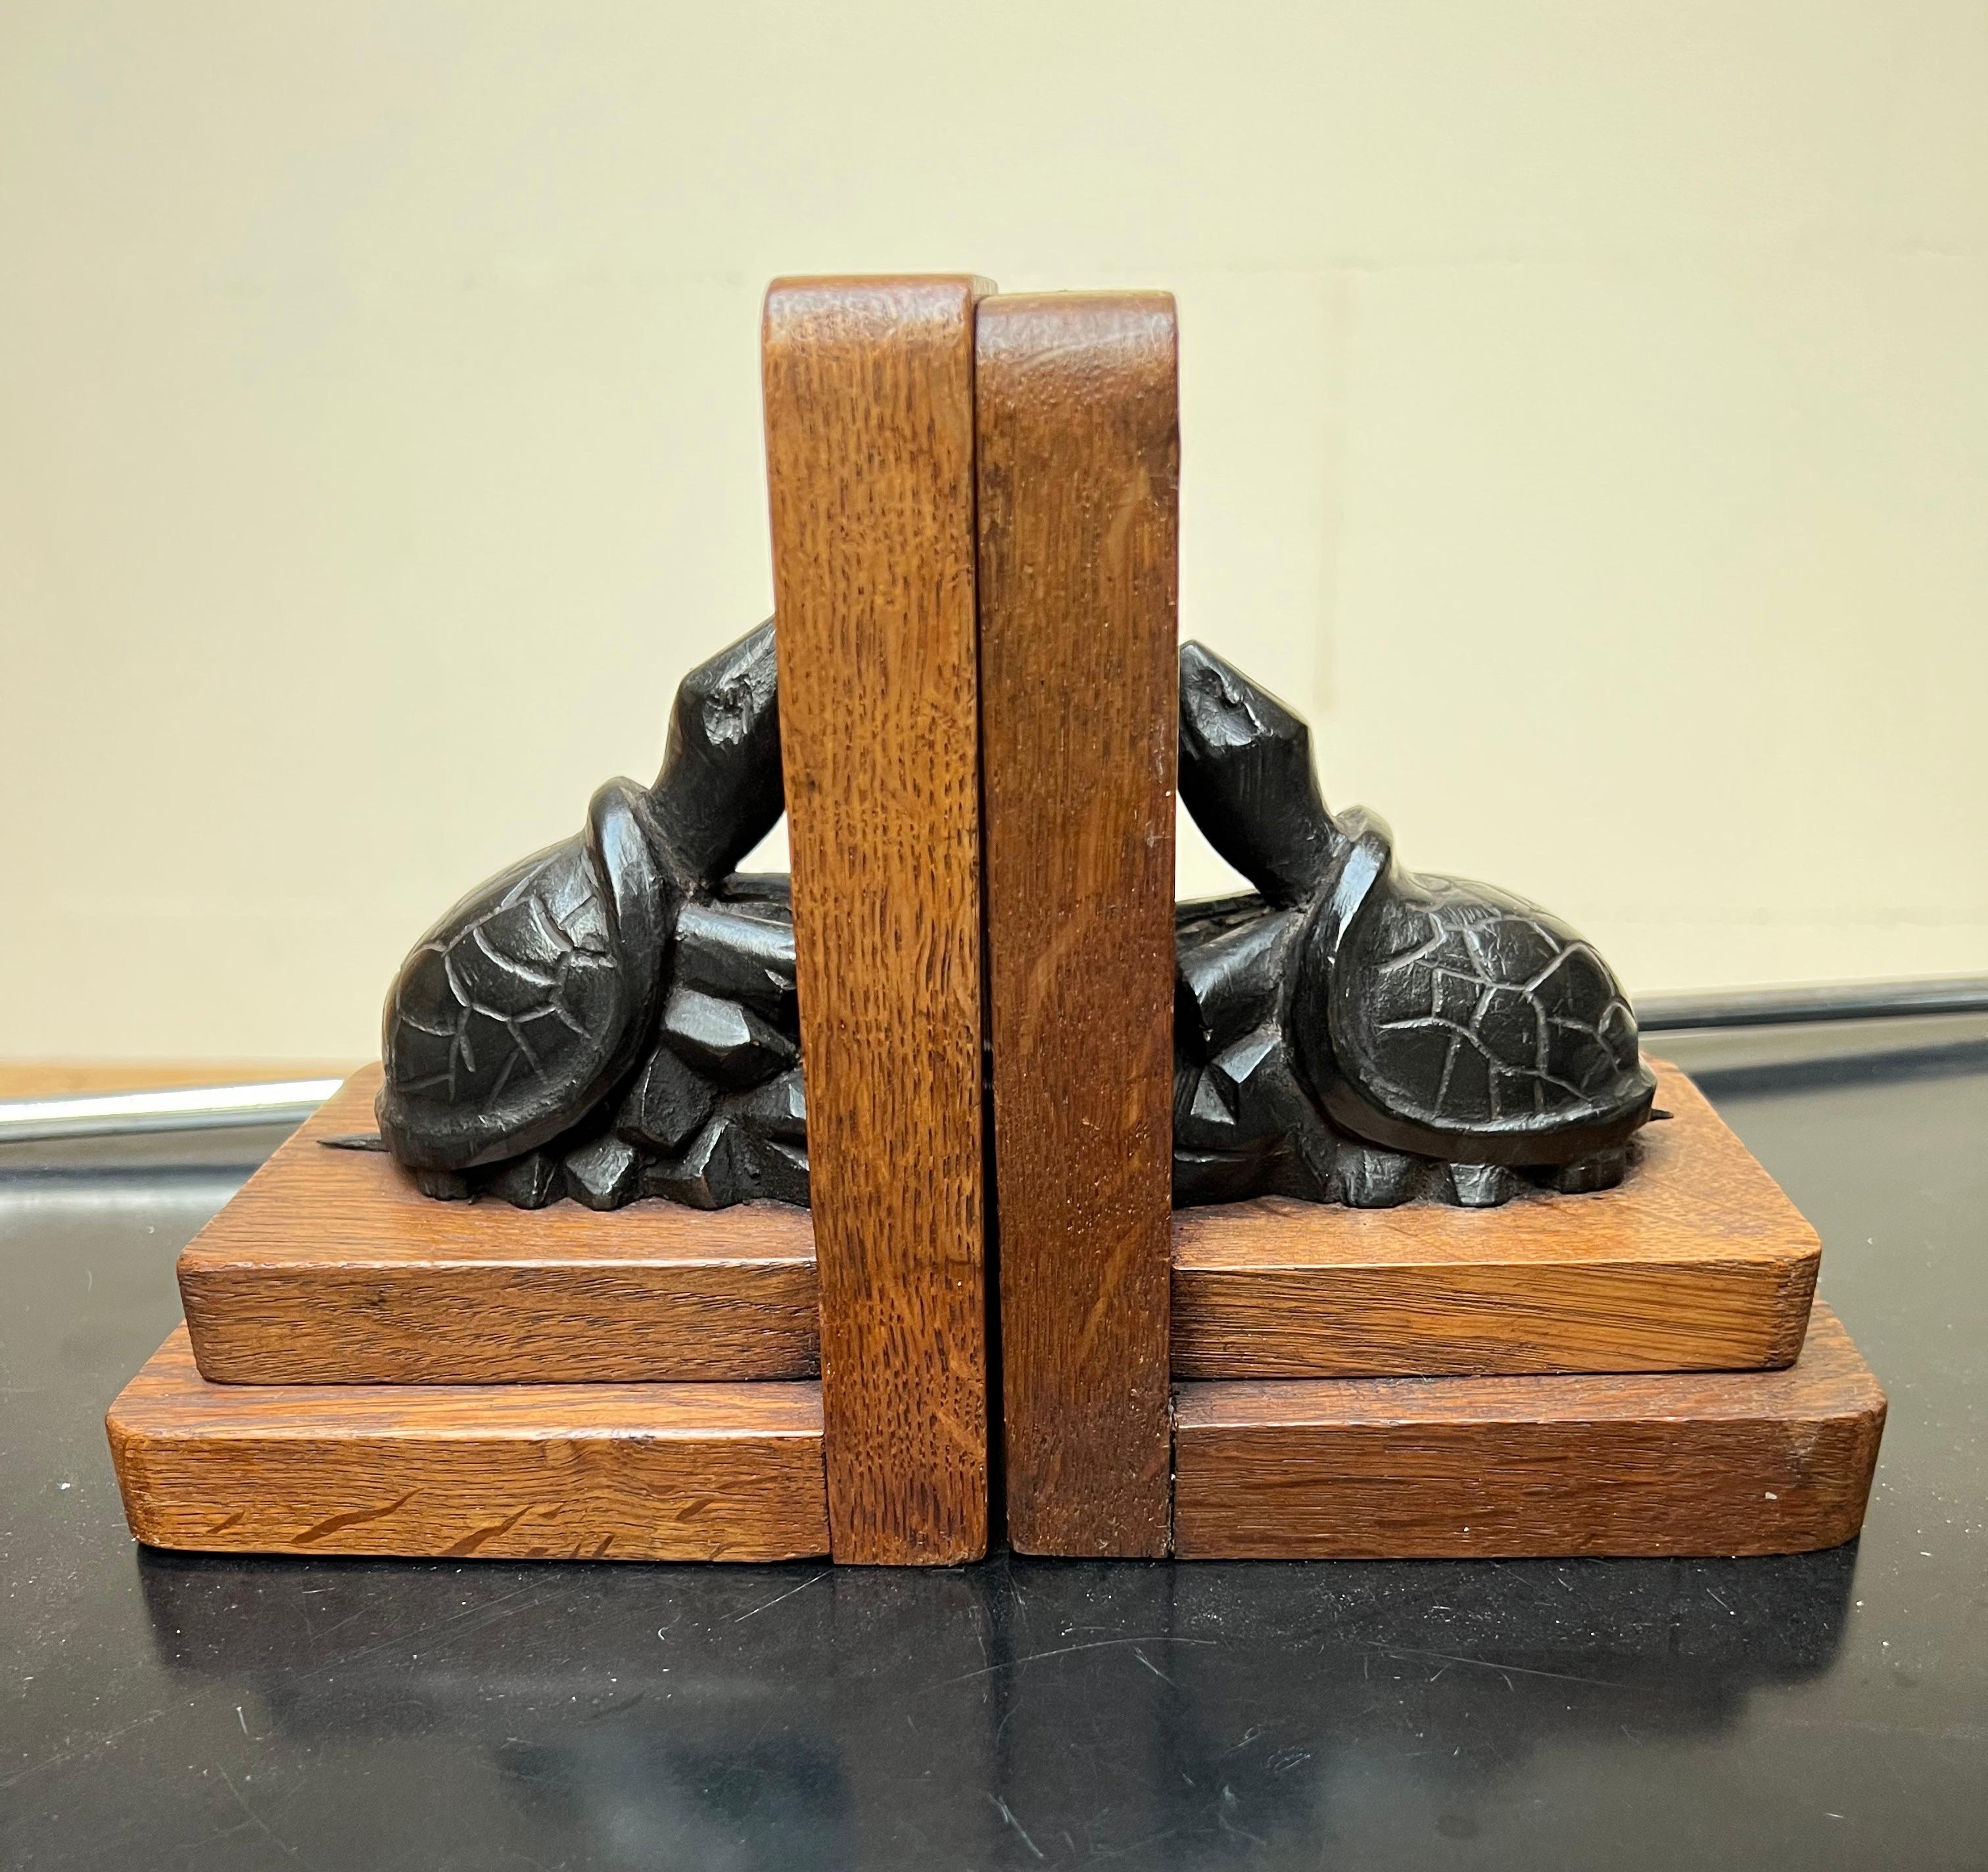 Endearing pair of stylish and quality carved turtle bookend.

If you like animal sculptures in general and turtles and turtle sculptures in particular then you will love this pair of Art Deco era bookends. In this day and age it is getting ever